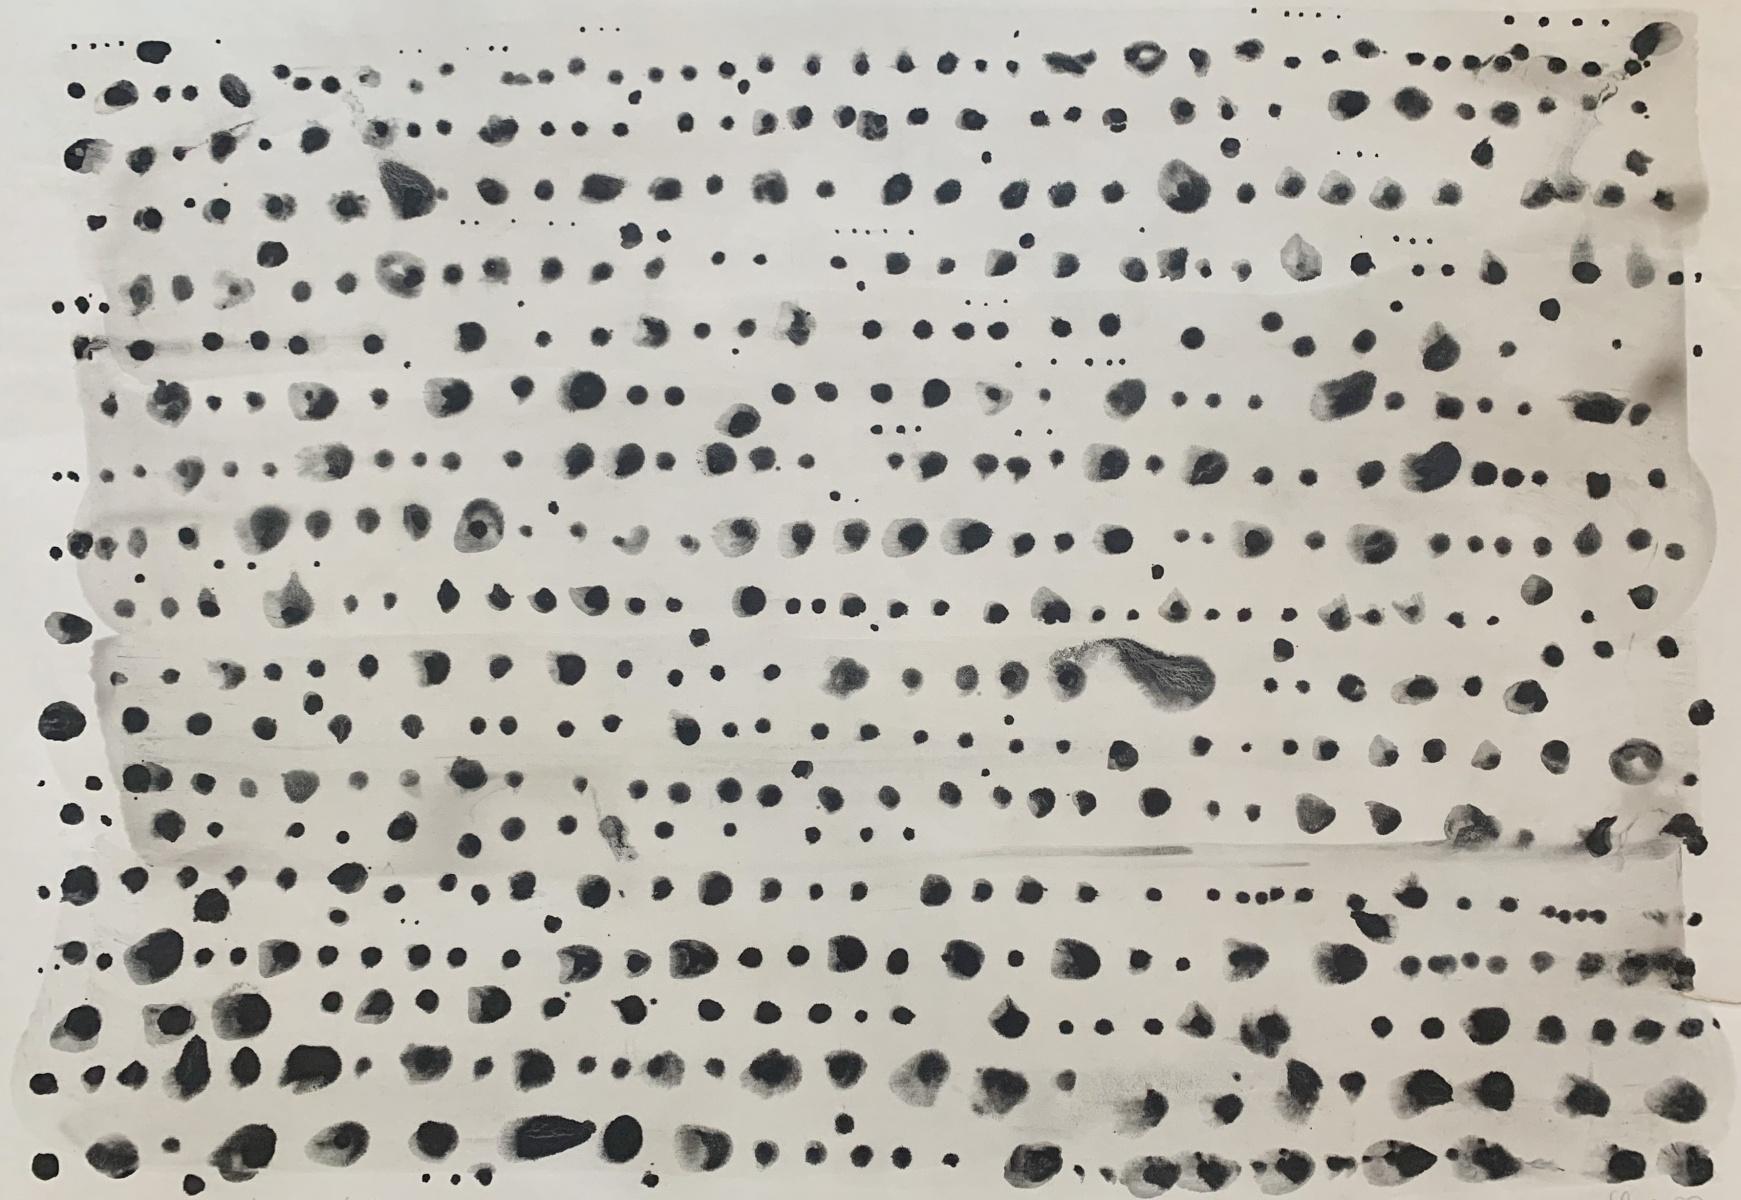 Many Black Holes - Contemporary art, Abstraction, Acrylic on paper, Black white